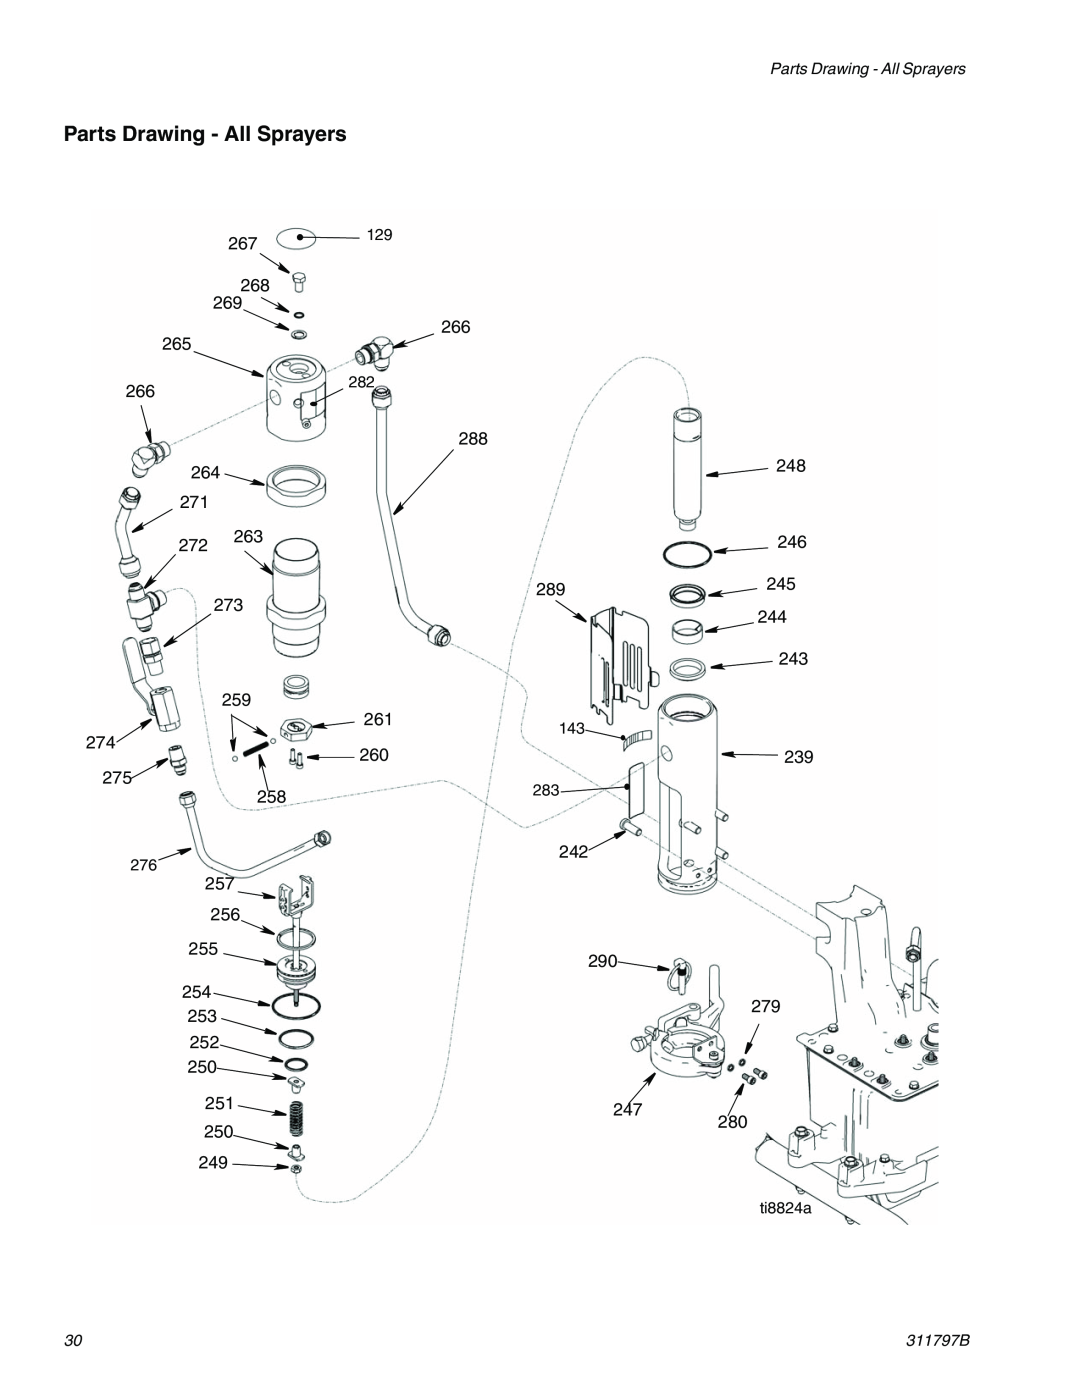 Uniden GH 130, GH 230, GH 200, GH 300 important safety instructions Parts Drawing - All Sprayers, 311797B 